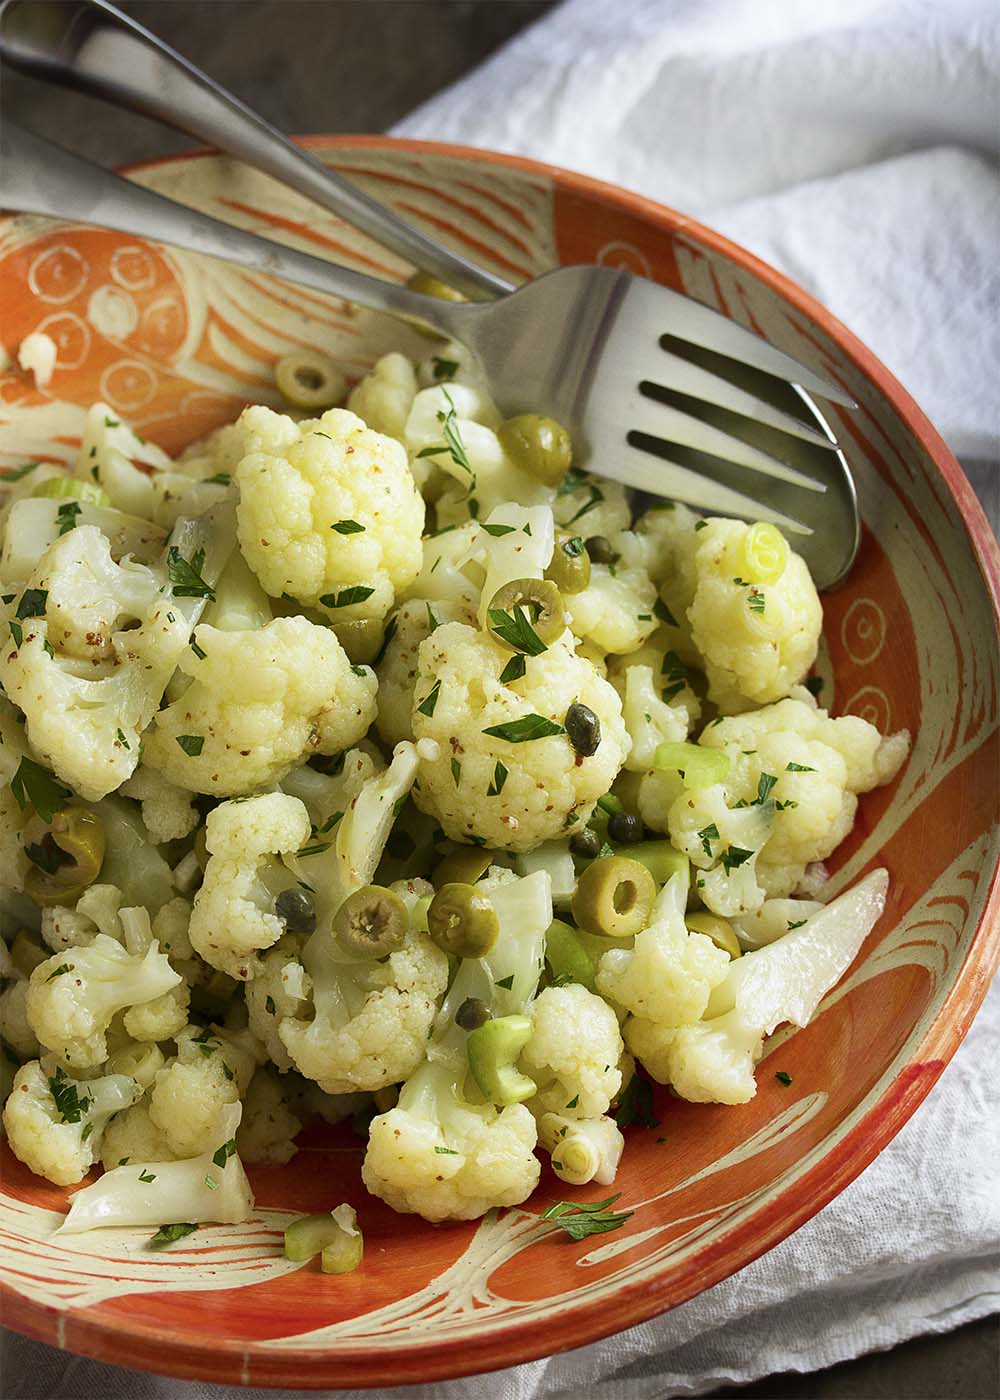 Cold cauliflower salad is a great year-round salad filled with tender cauliflower, briny capers, meaty green olives and plenty of fresh parsley. | justalittlebitofbacon.com